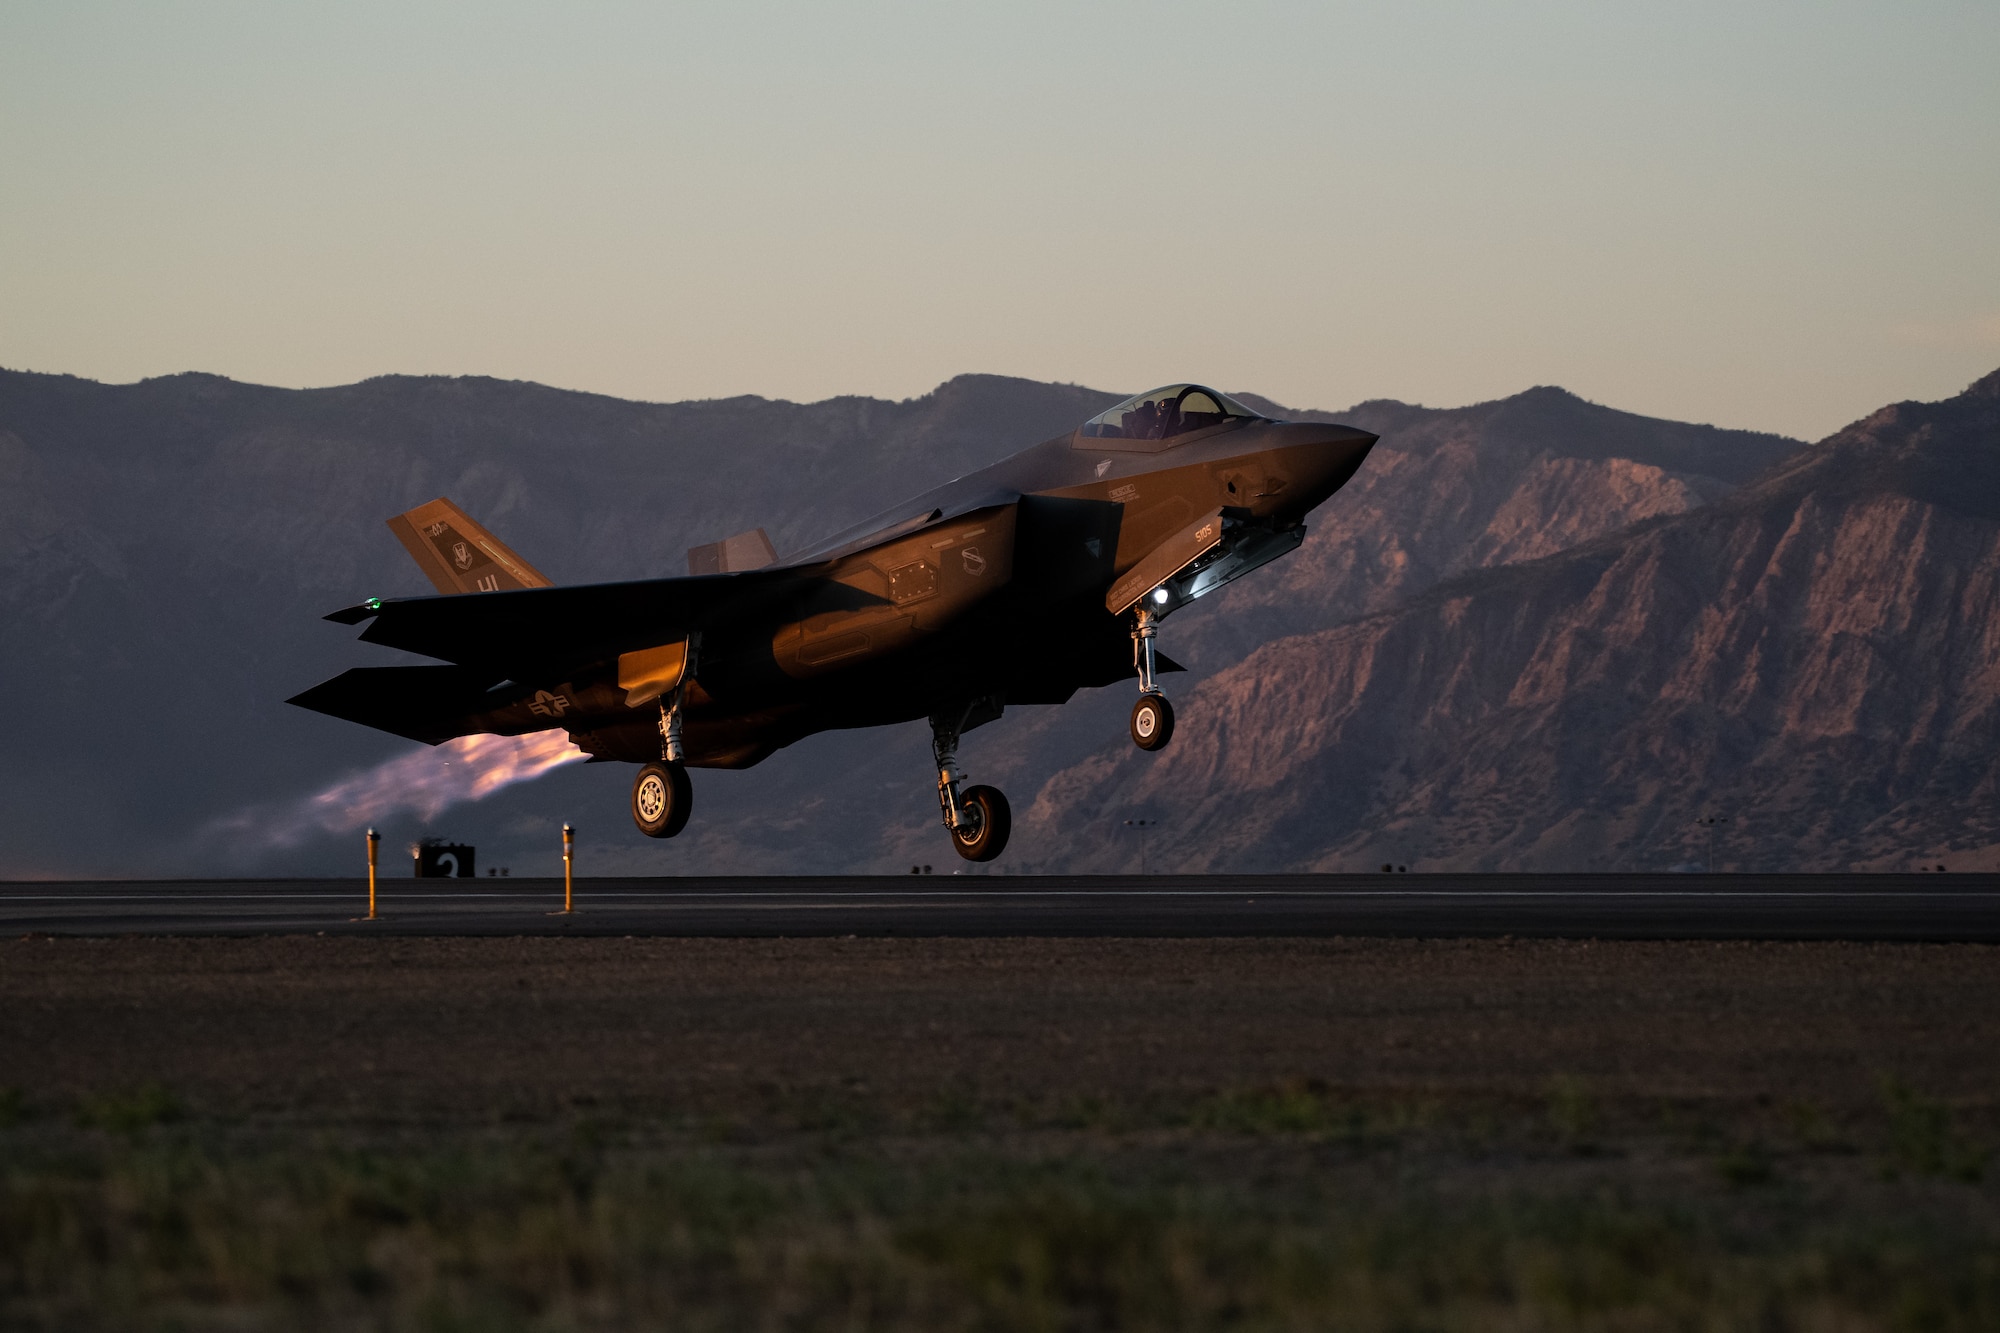 An F-35A lifts off from Hill Air Force Base, Utah, the evening of Aug. 20, 2019, as the active duty 388th and reserve 419th Fighter Wings conducted local night flying operations. The wings are required to train at night to maintain their readiness and all-weather capabilities. Increased flying also provides a valuable opportunity to evaluate aircraft maintenance resiliency and operational agility. (U.S. Air Force photo by R. Nial Bradshaw)